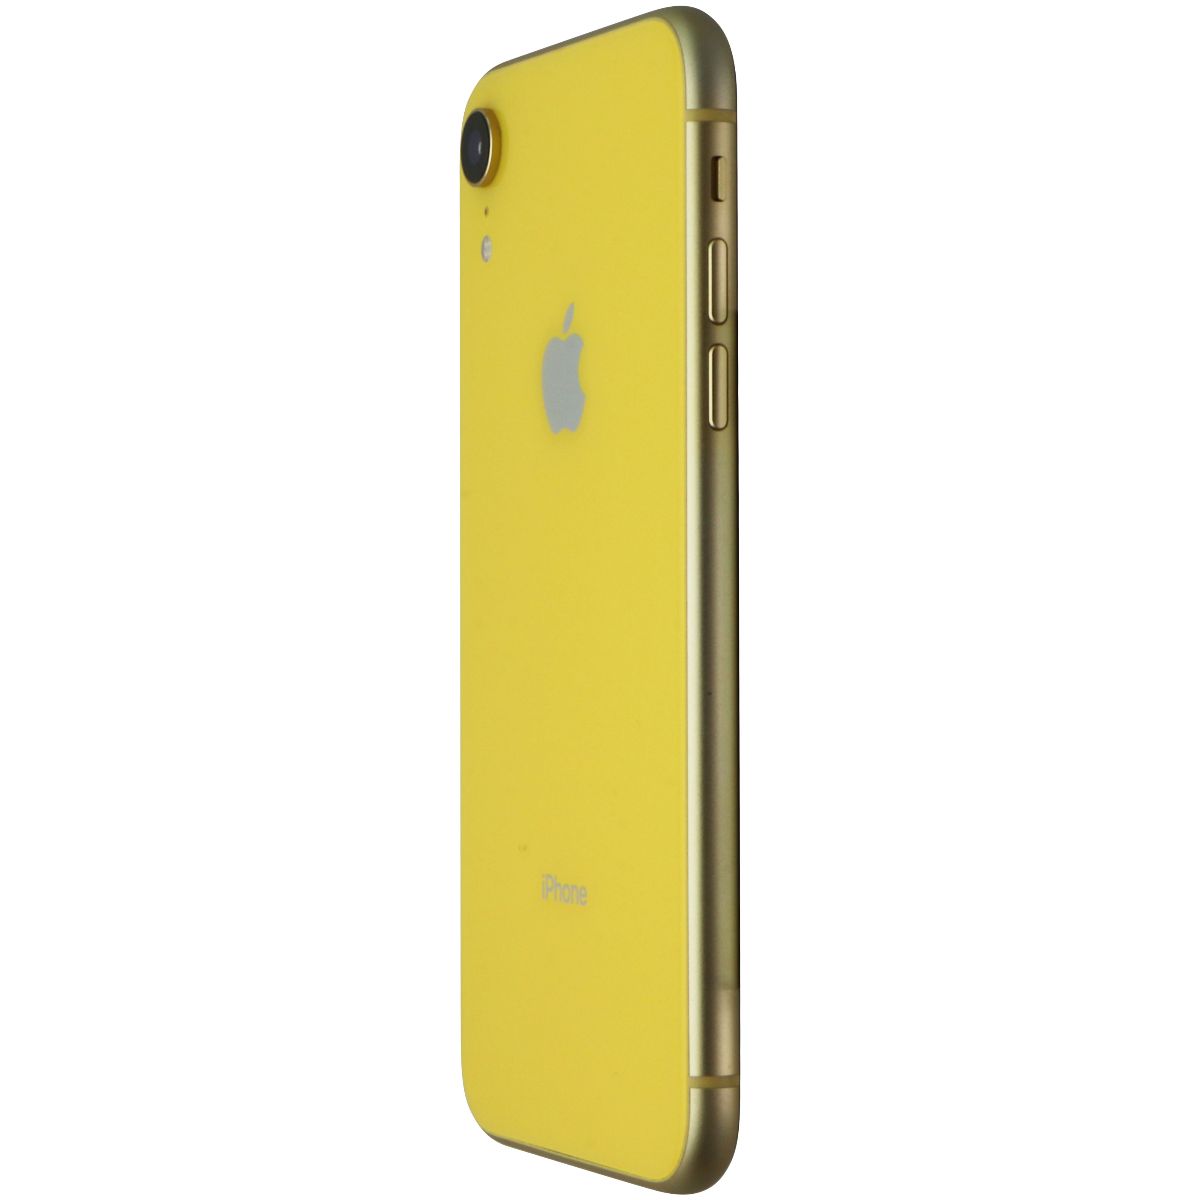 Apple iPhone XR (6.1-inch) (A1984) Unlocked - 64GB/Yellow BAD PROX SENSOR* Cell Phones & Smartphones Apple    - Simple Cell Bulk Wholesale Pricing - USA Seller